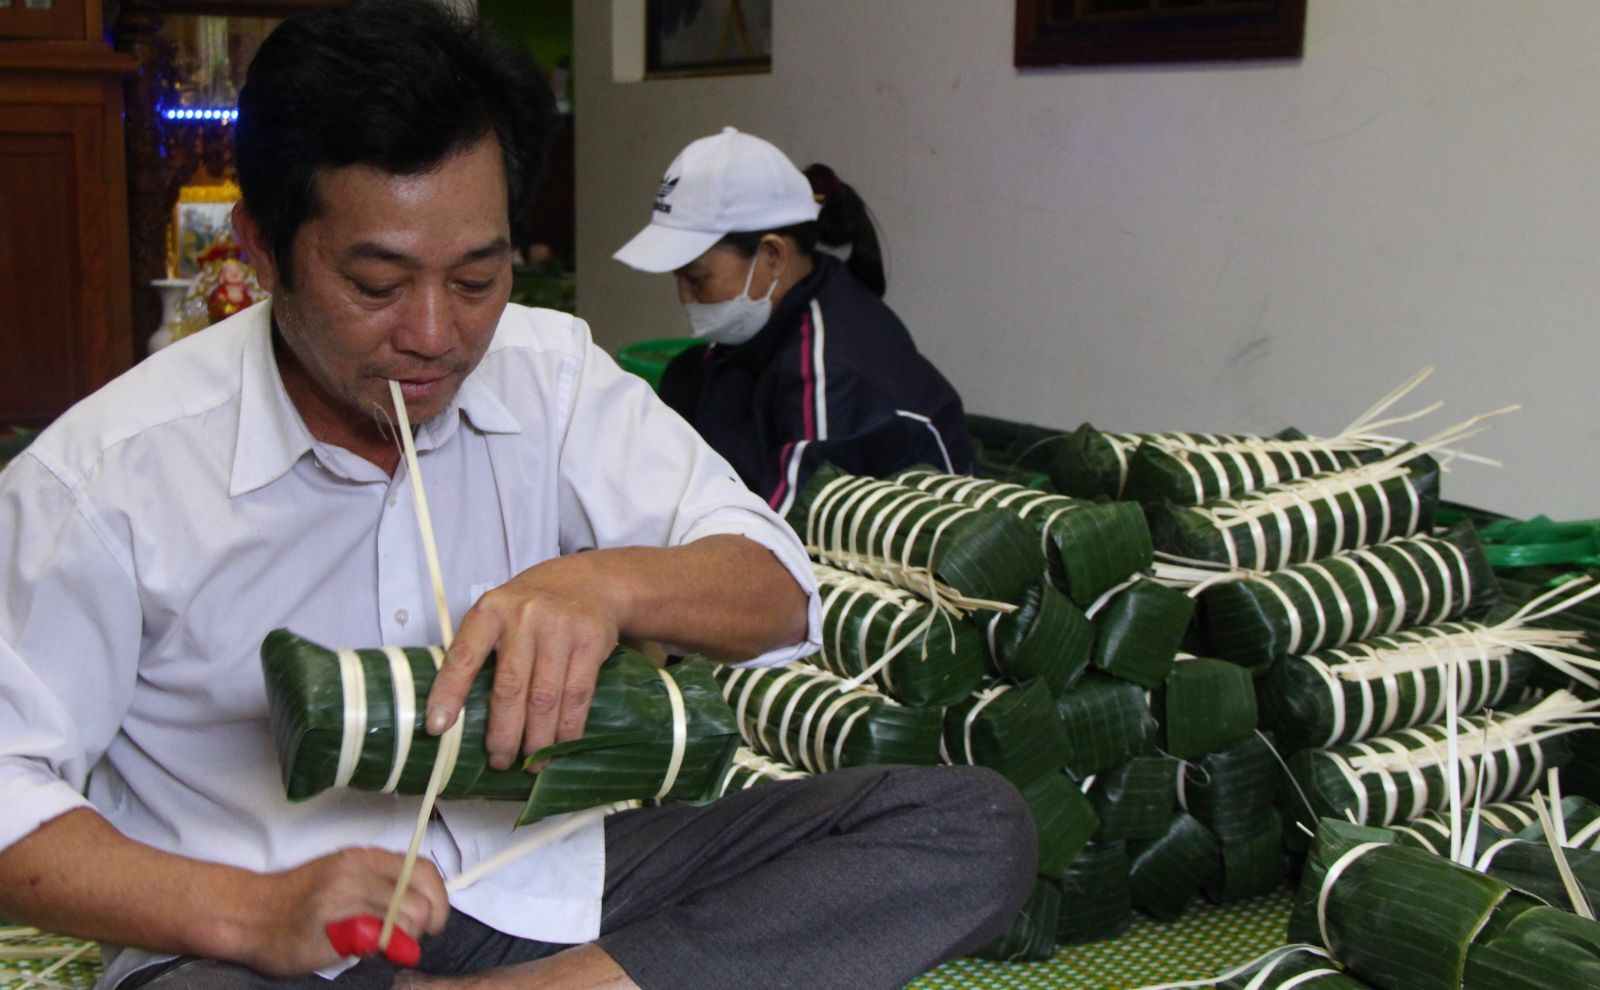 Each batch is tied by 8 bamboo strings to create the balance